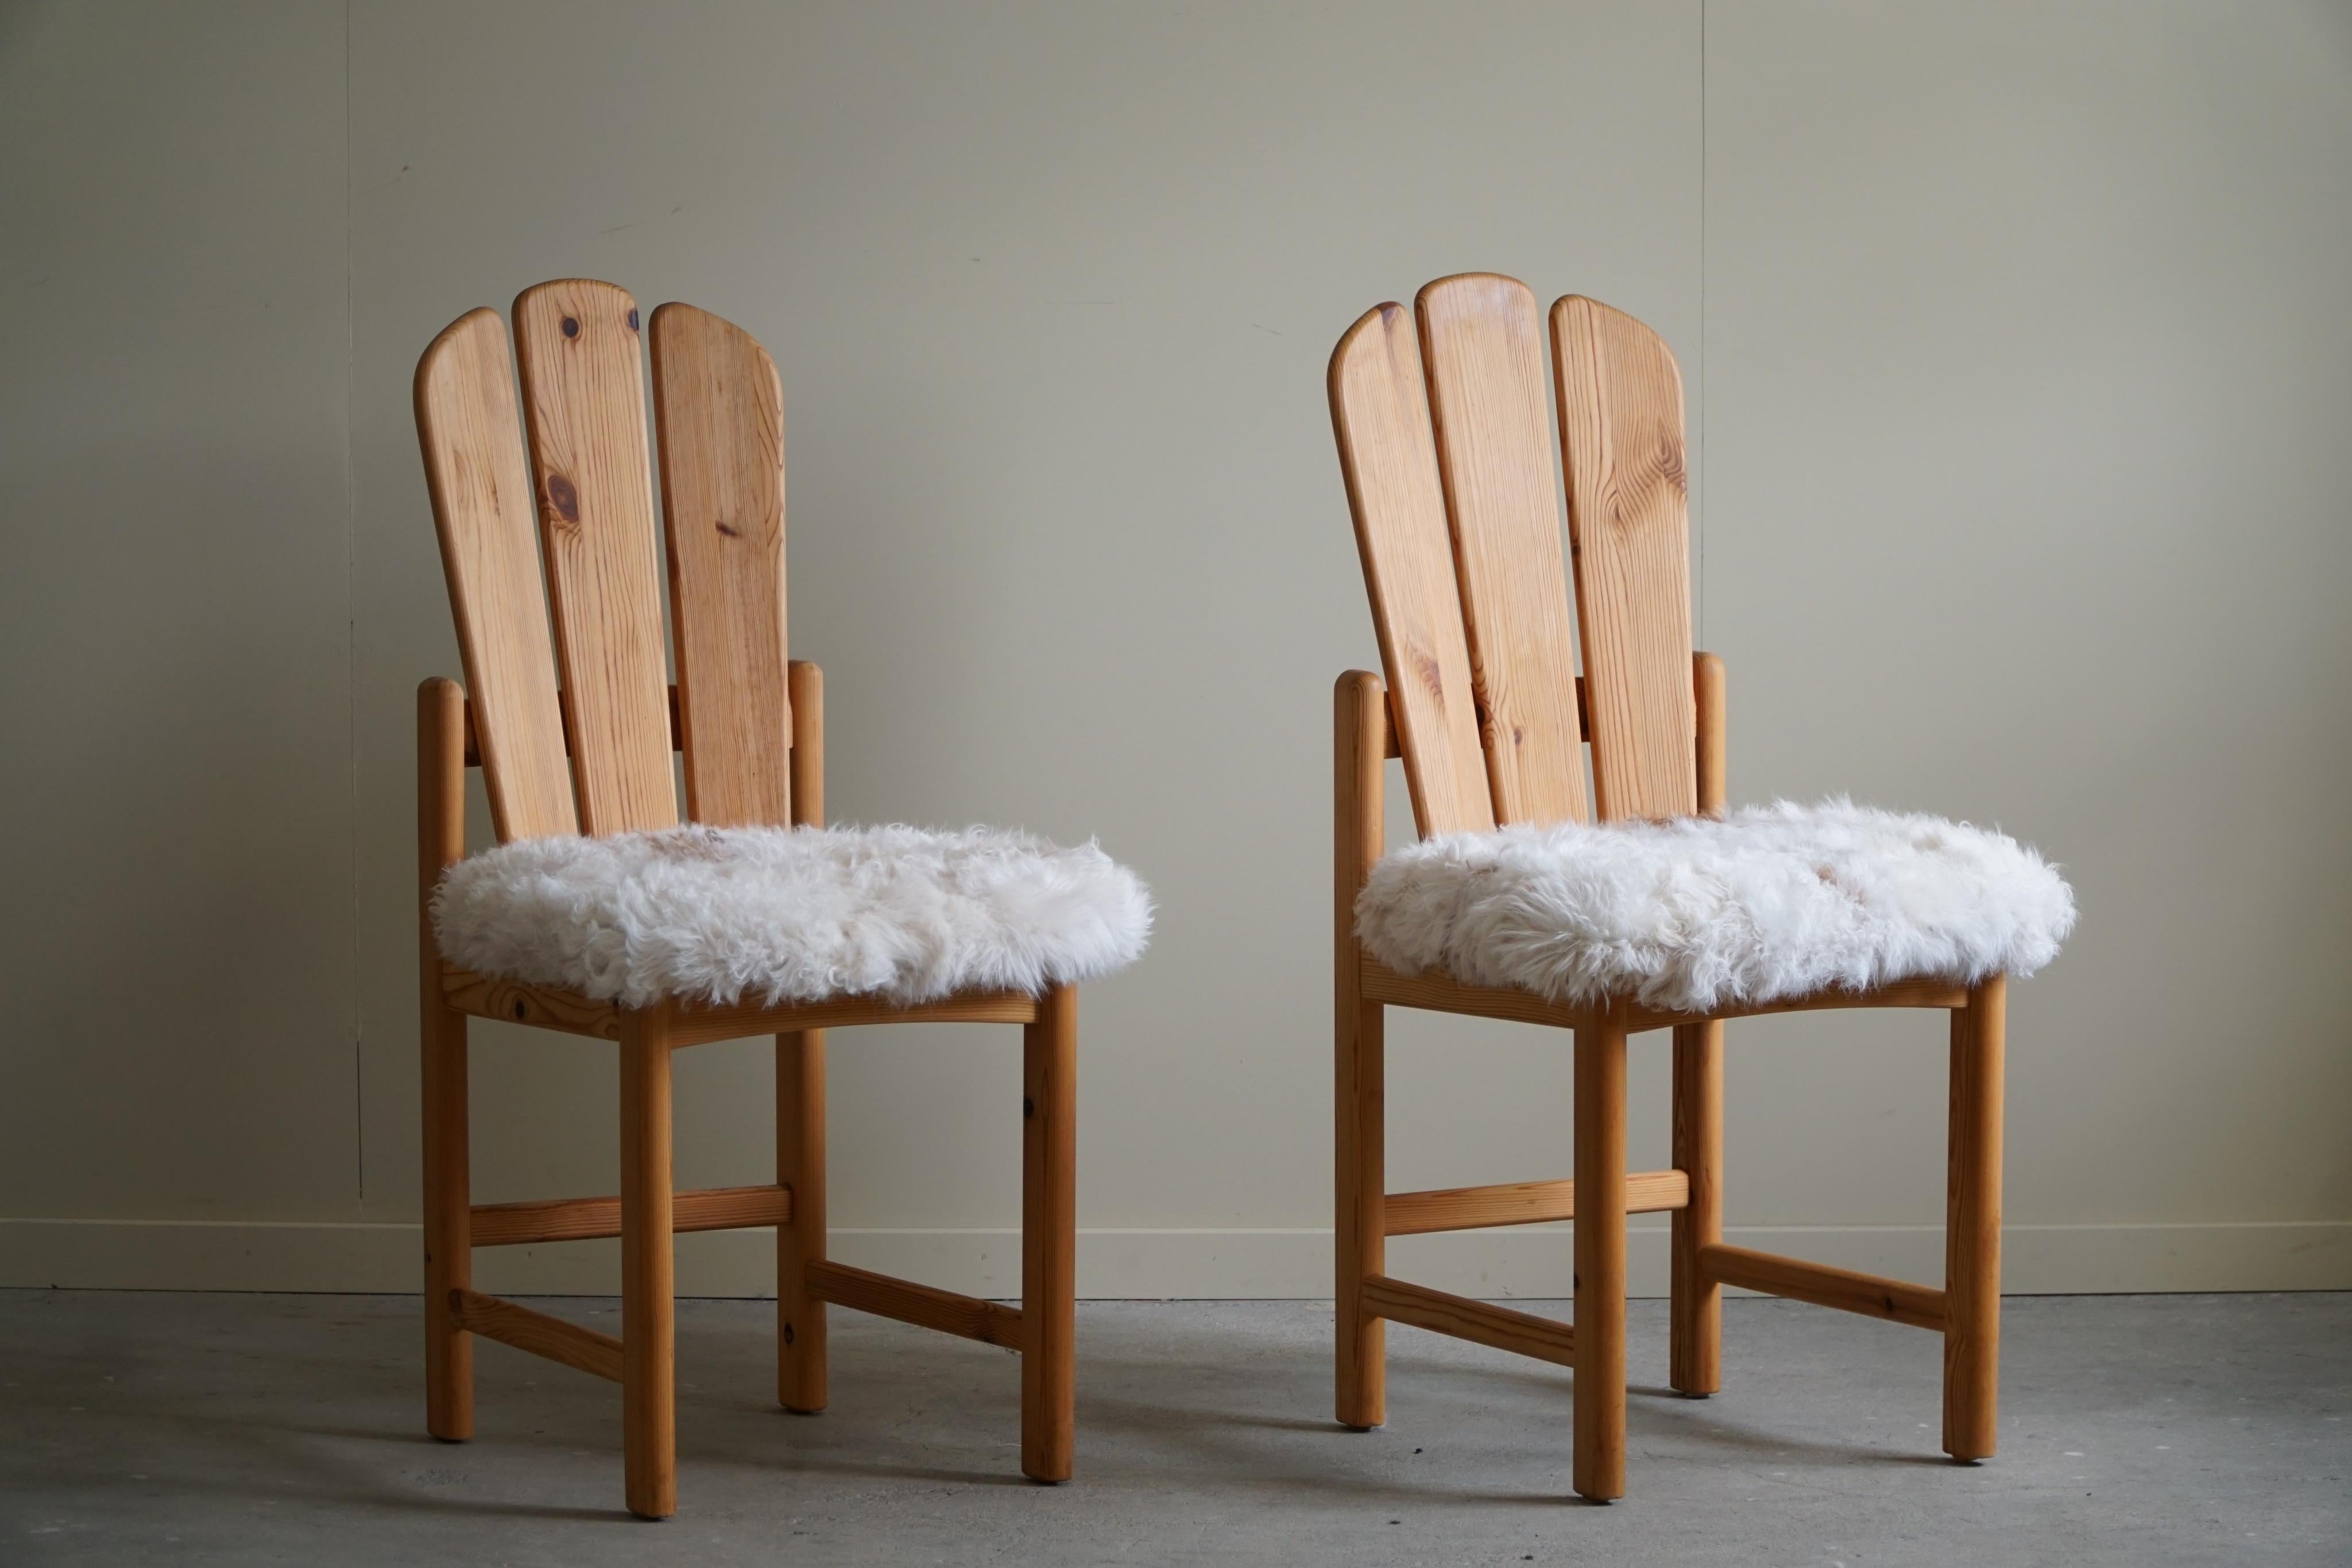 Pair of 2 Sculptural Danish Modern Brutalist Dining Chairs in Solid Pine, 1970s For Sale 7